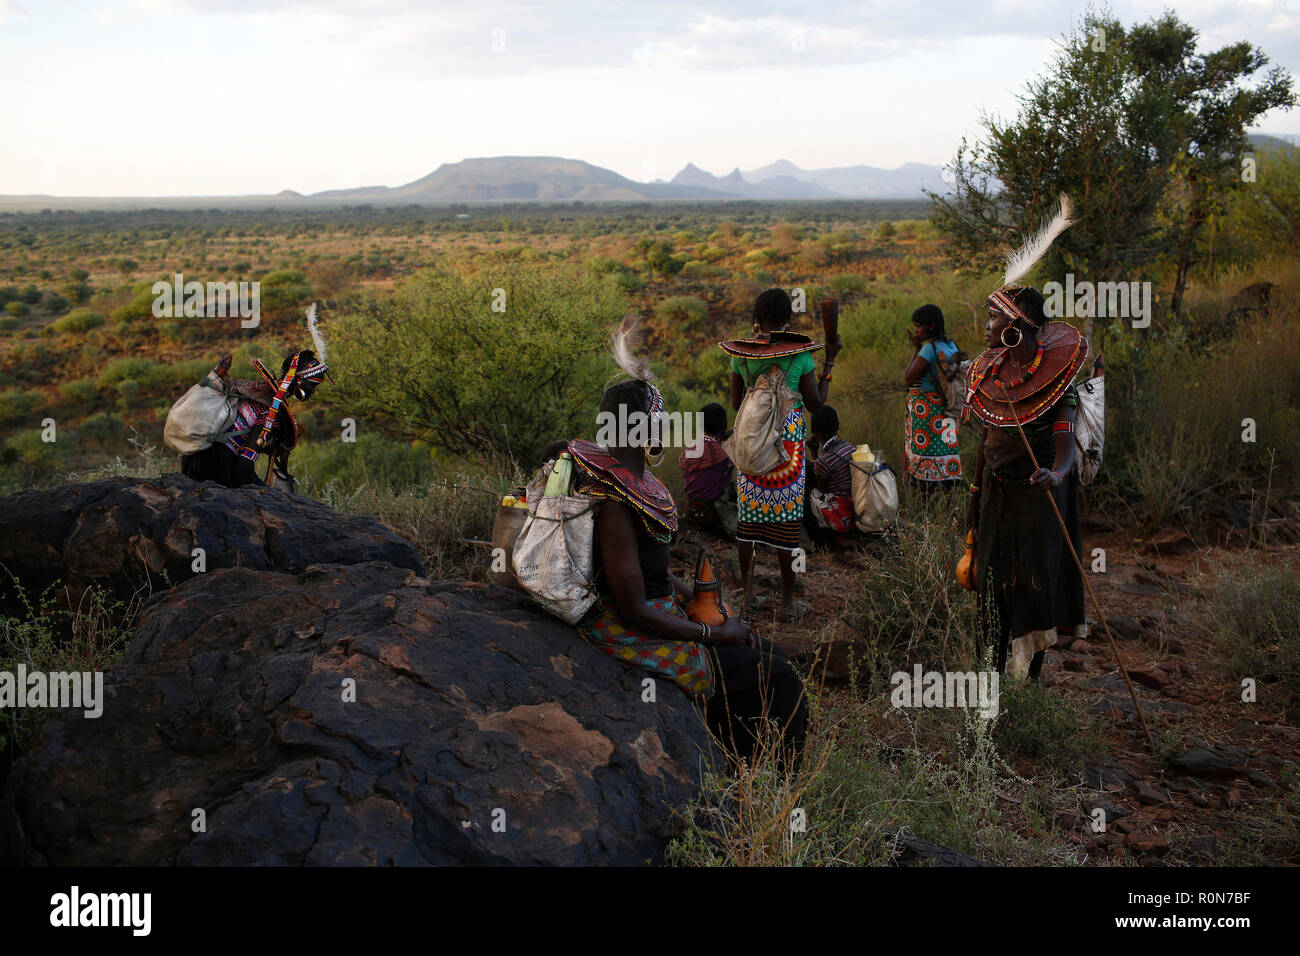 Women take a rest on a hilltop after walking for several kilometres in Baringo County, Kenya, October 1, 2018. Stock Photo